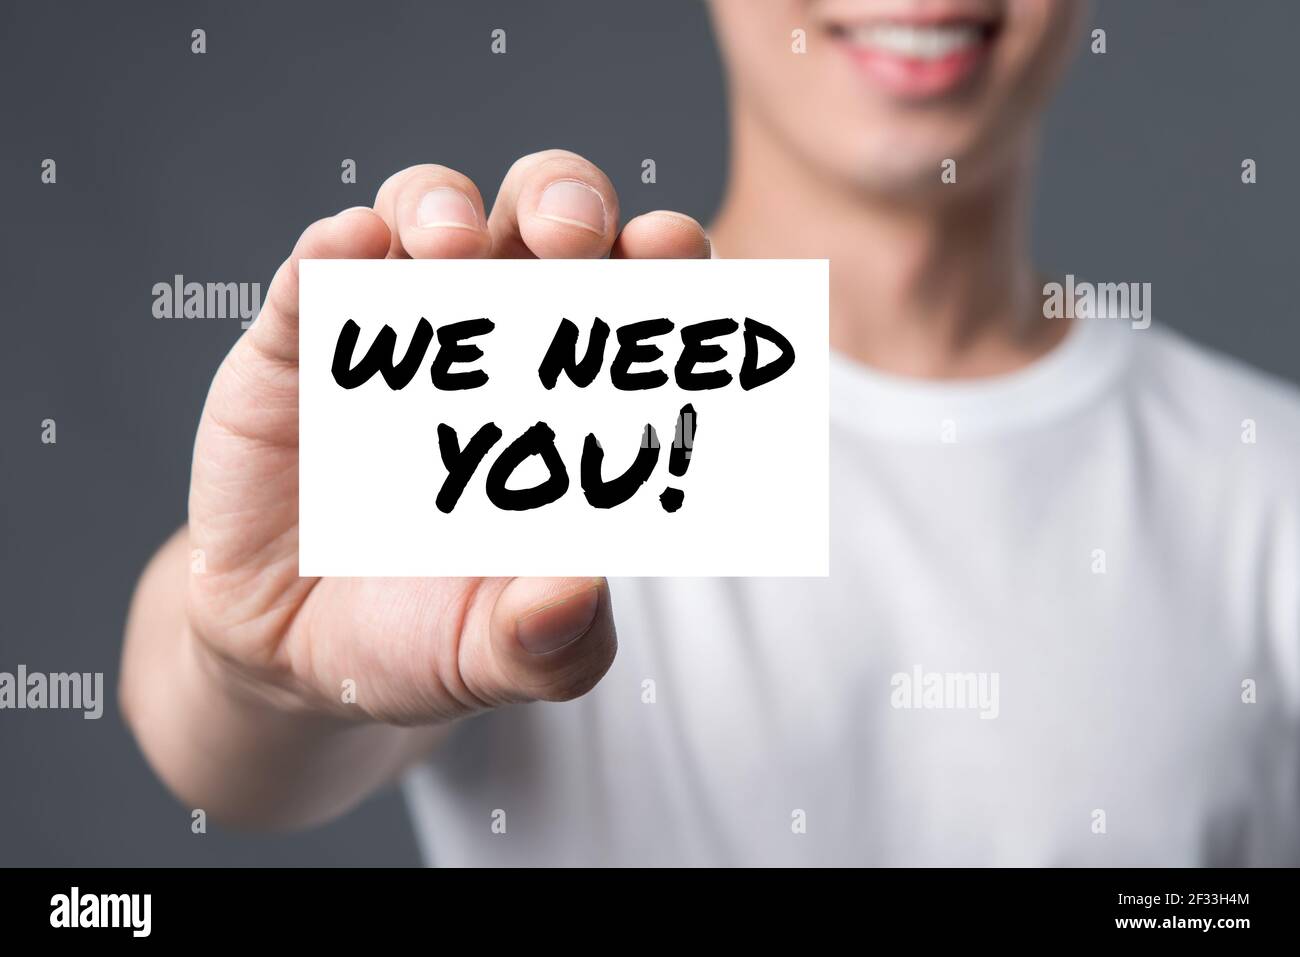 WE NEED YOU! message on the card shown by a man Stock Photo